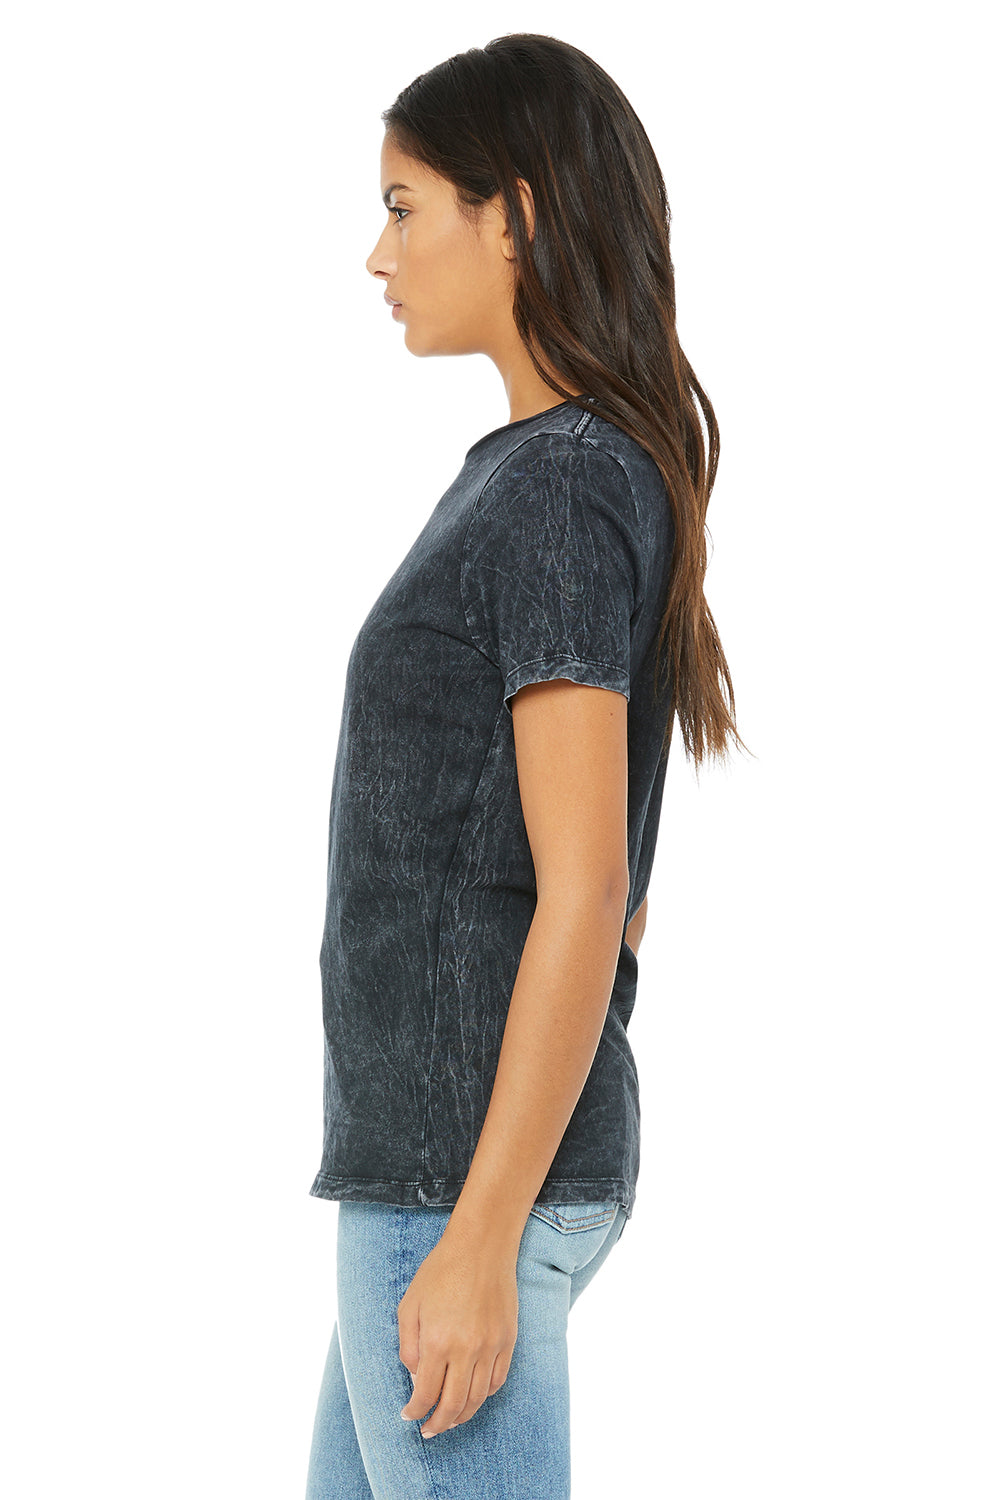 Bella + Canvas B6400 Womens Relaxed Jersey Short Sleeve Crewneck T-Shirt Black Mineral Wash Side